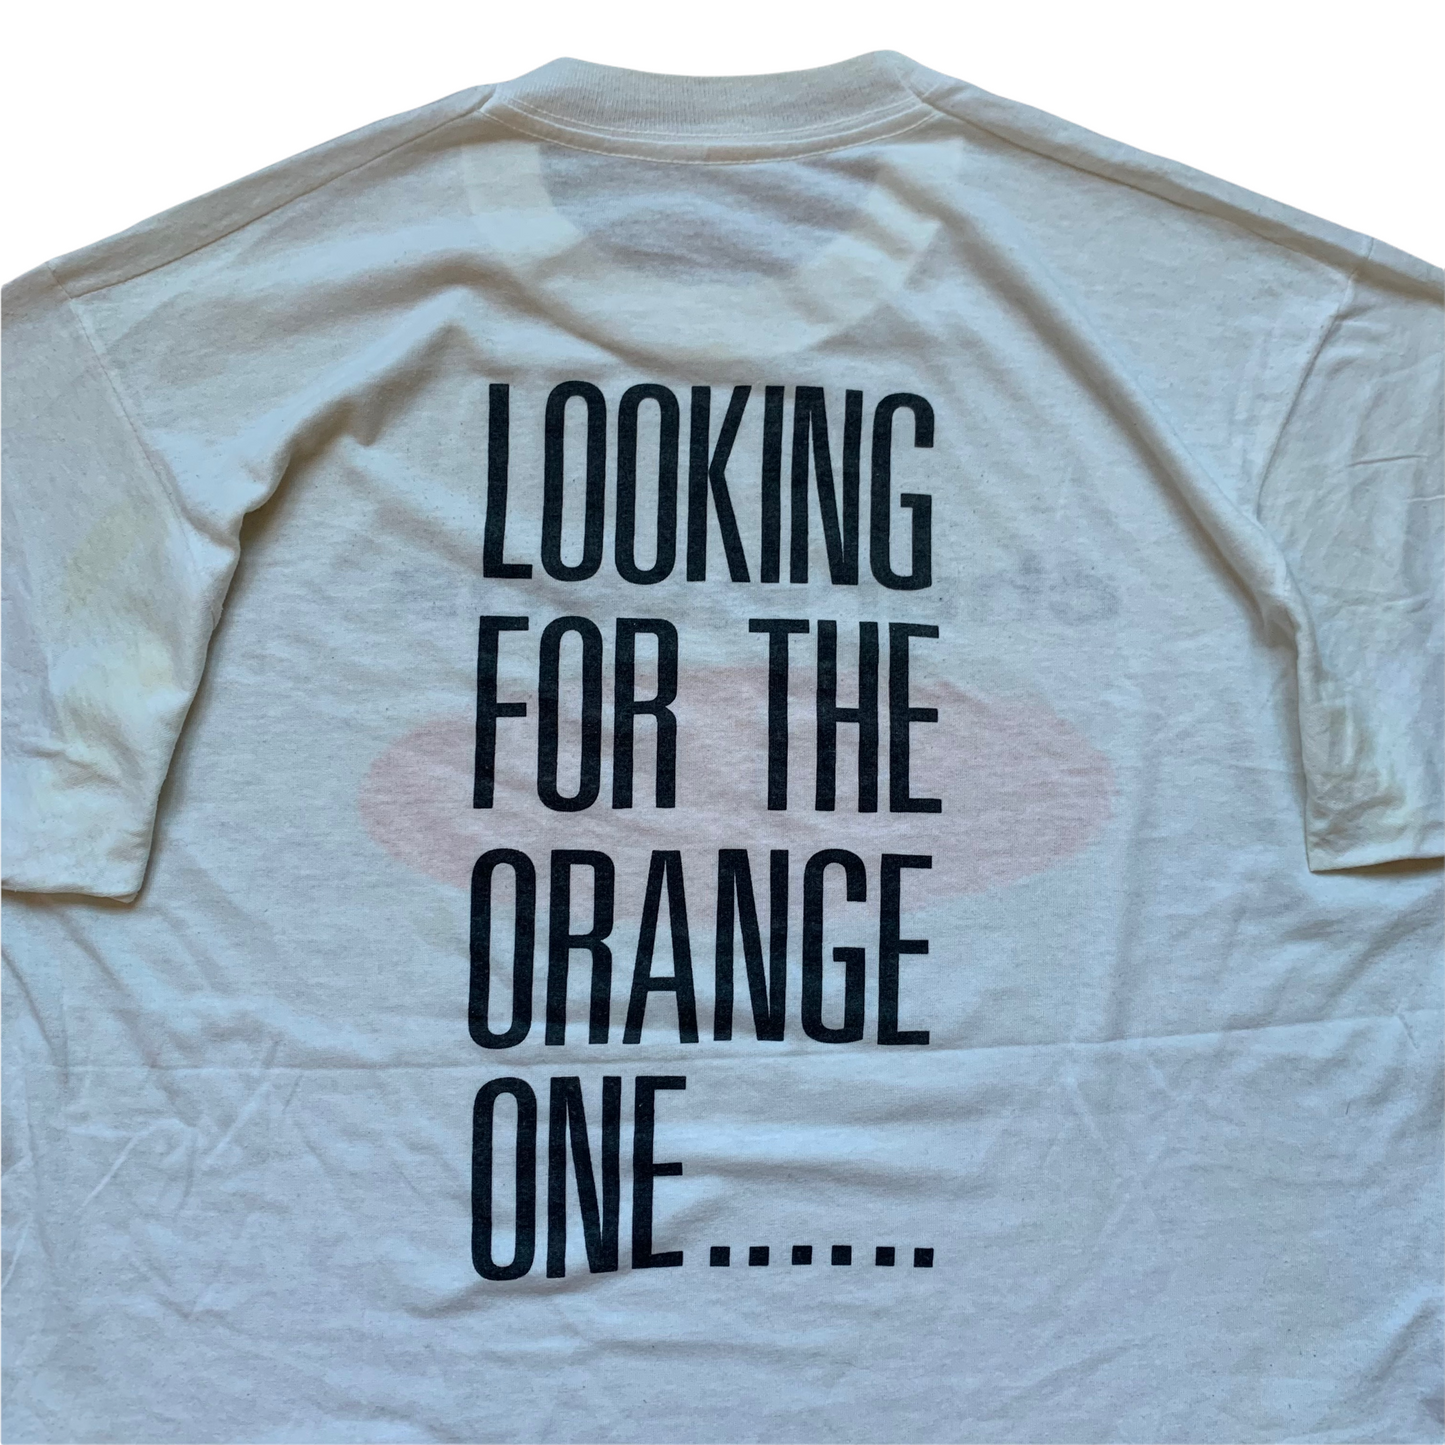 1990 The Charlatans ‘Looking for the Orange One’ (L)